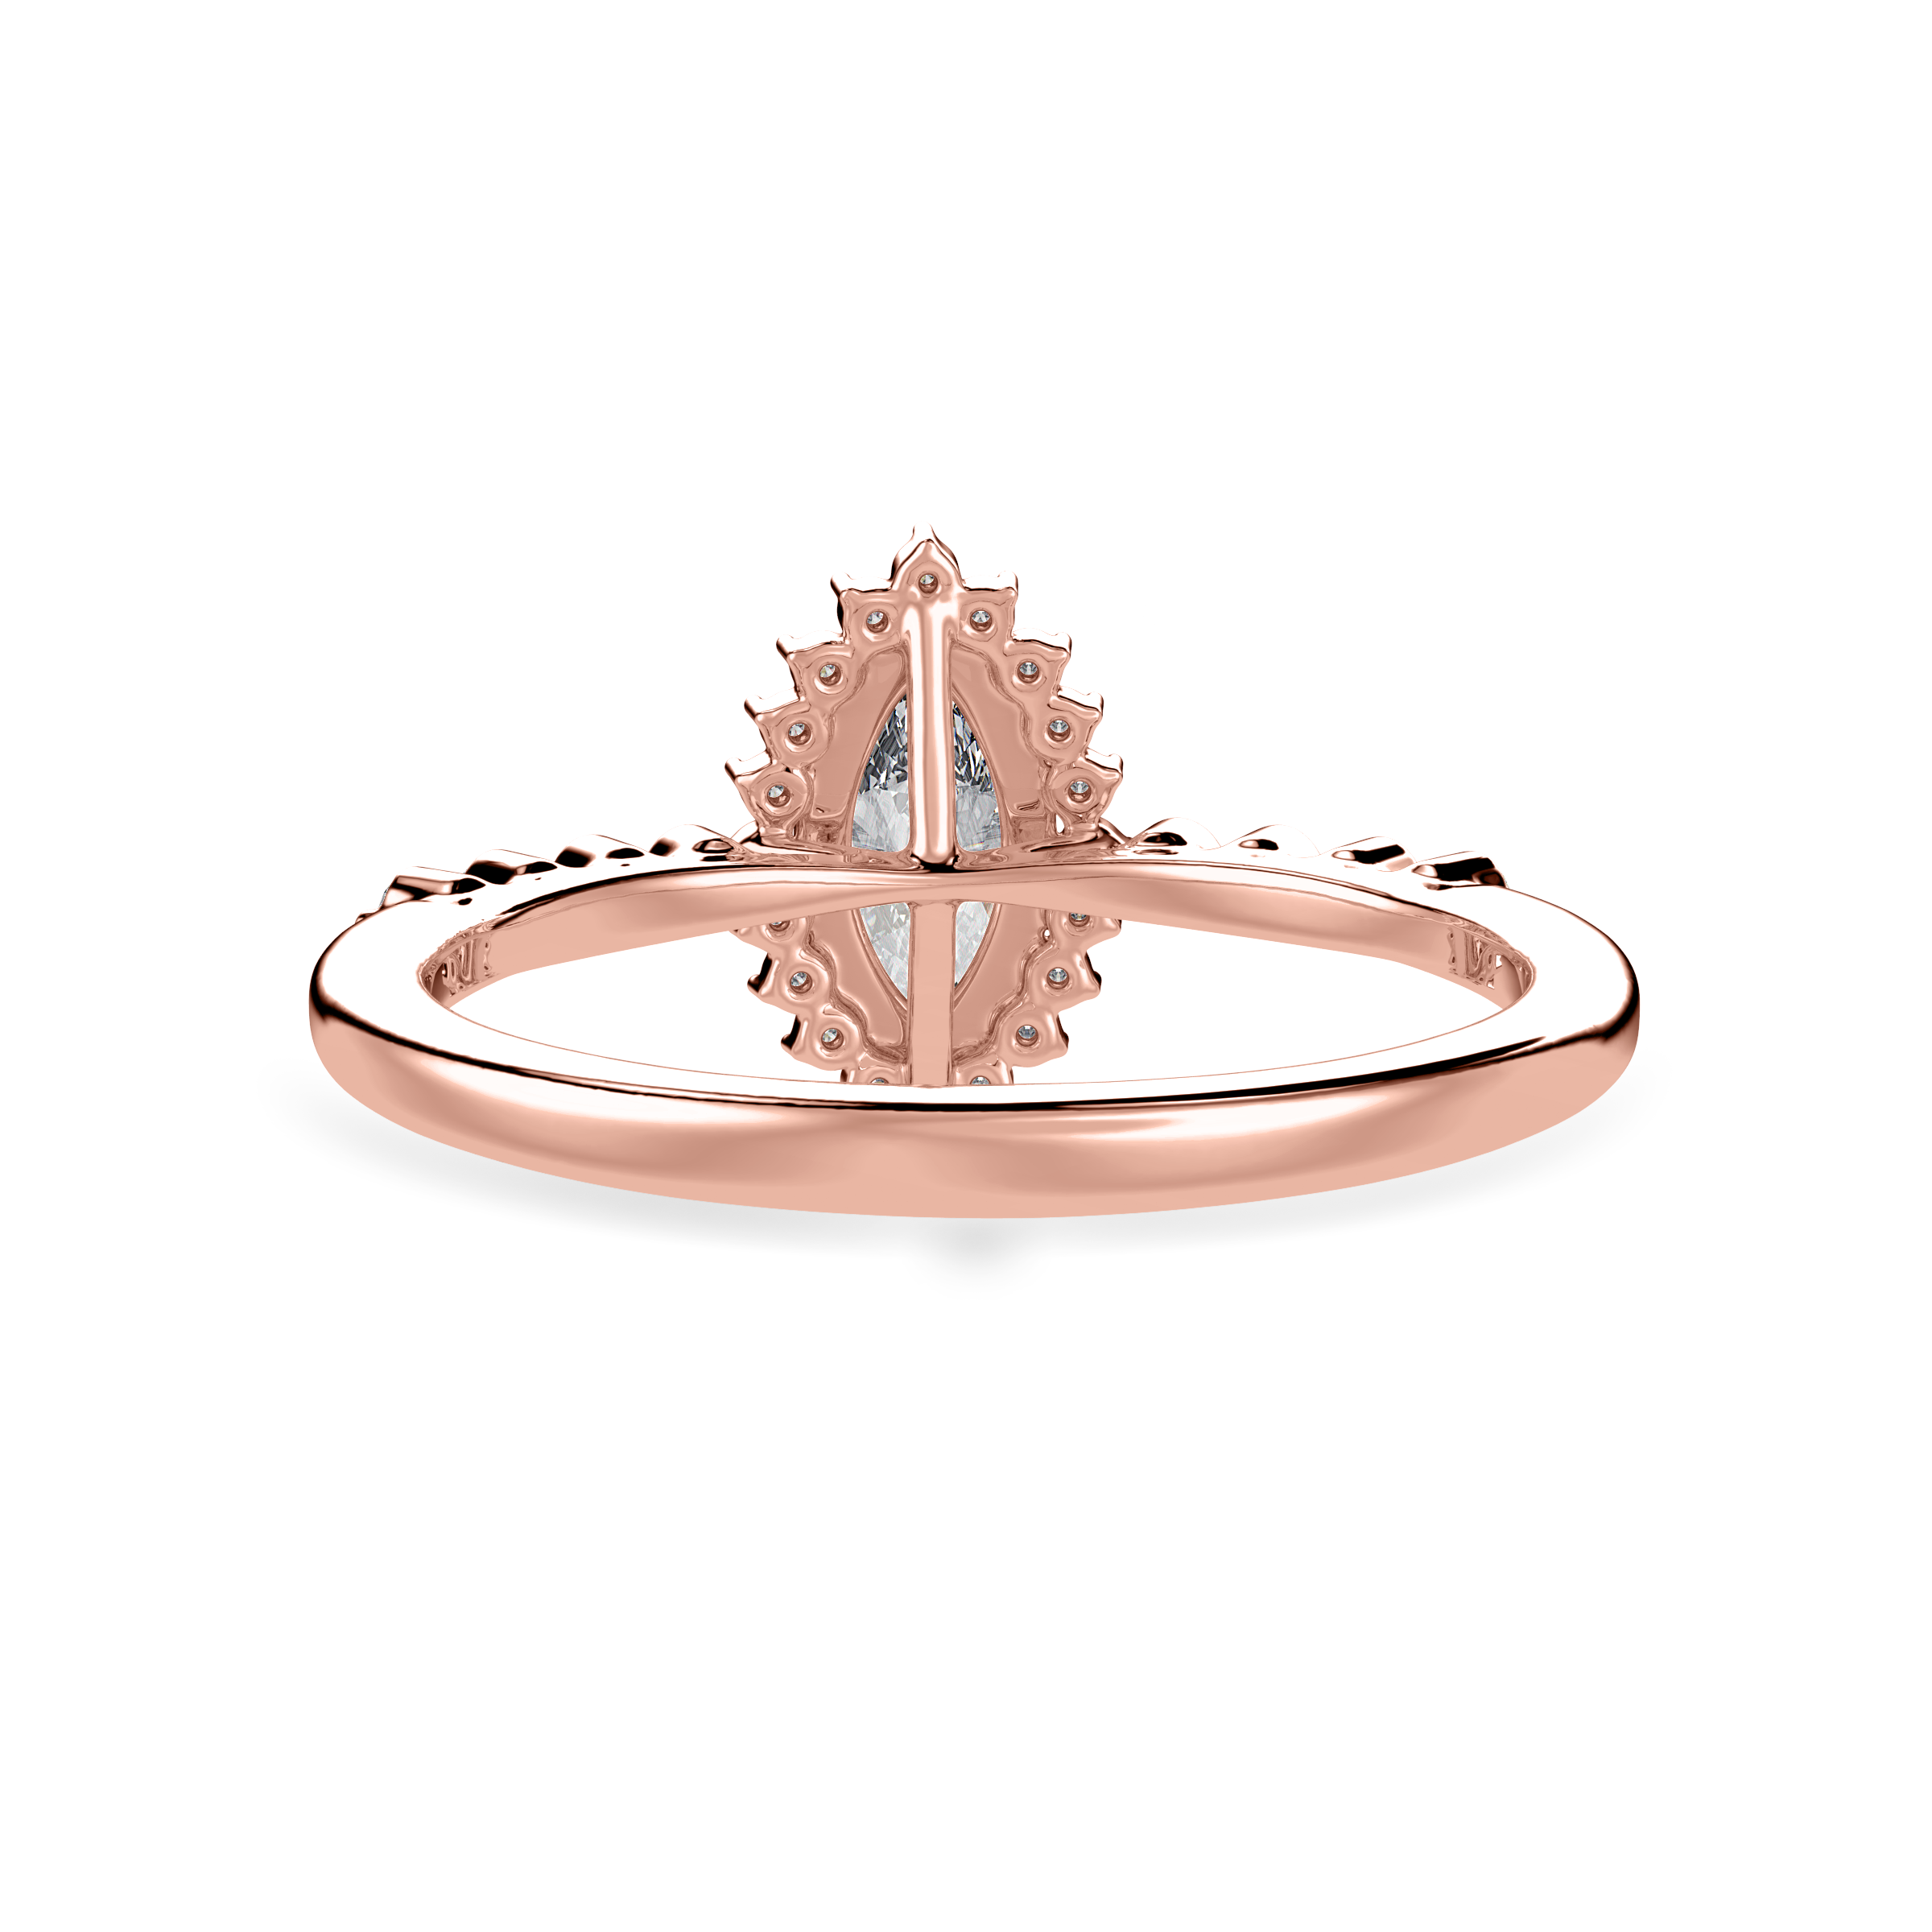 30-Pointer Marquise Cut Solitaire Halo Diamond Shank 18K Rose Gold Ring JL AU 1254R